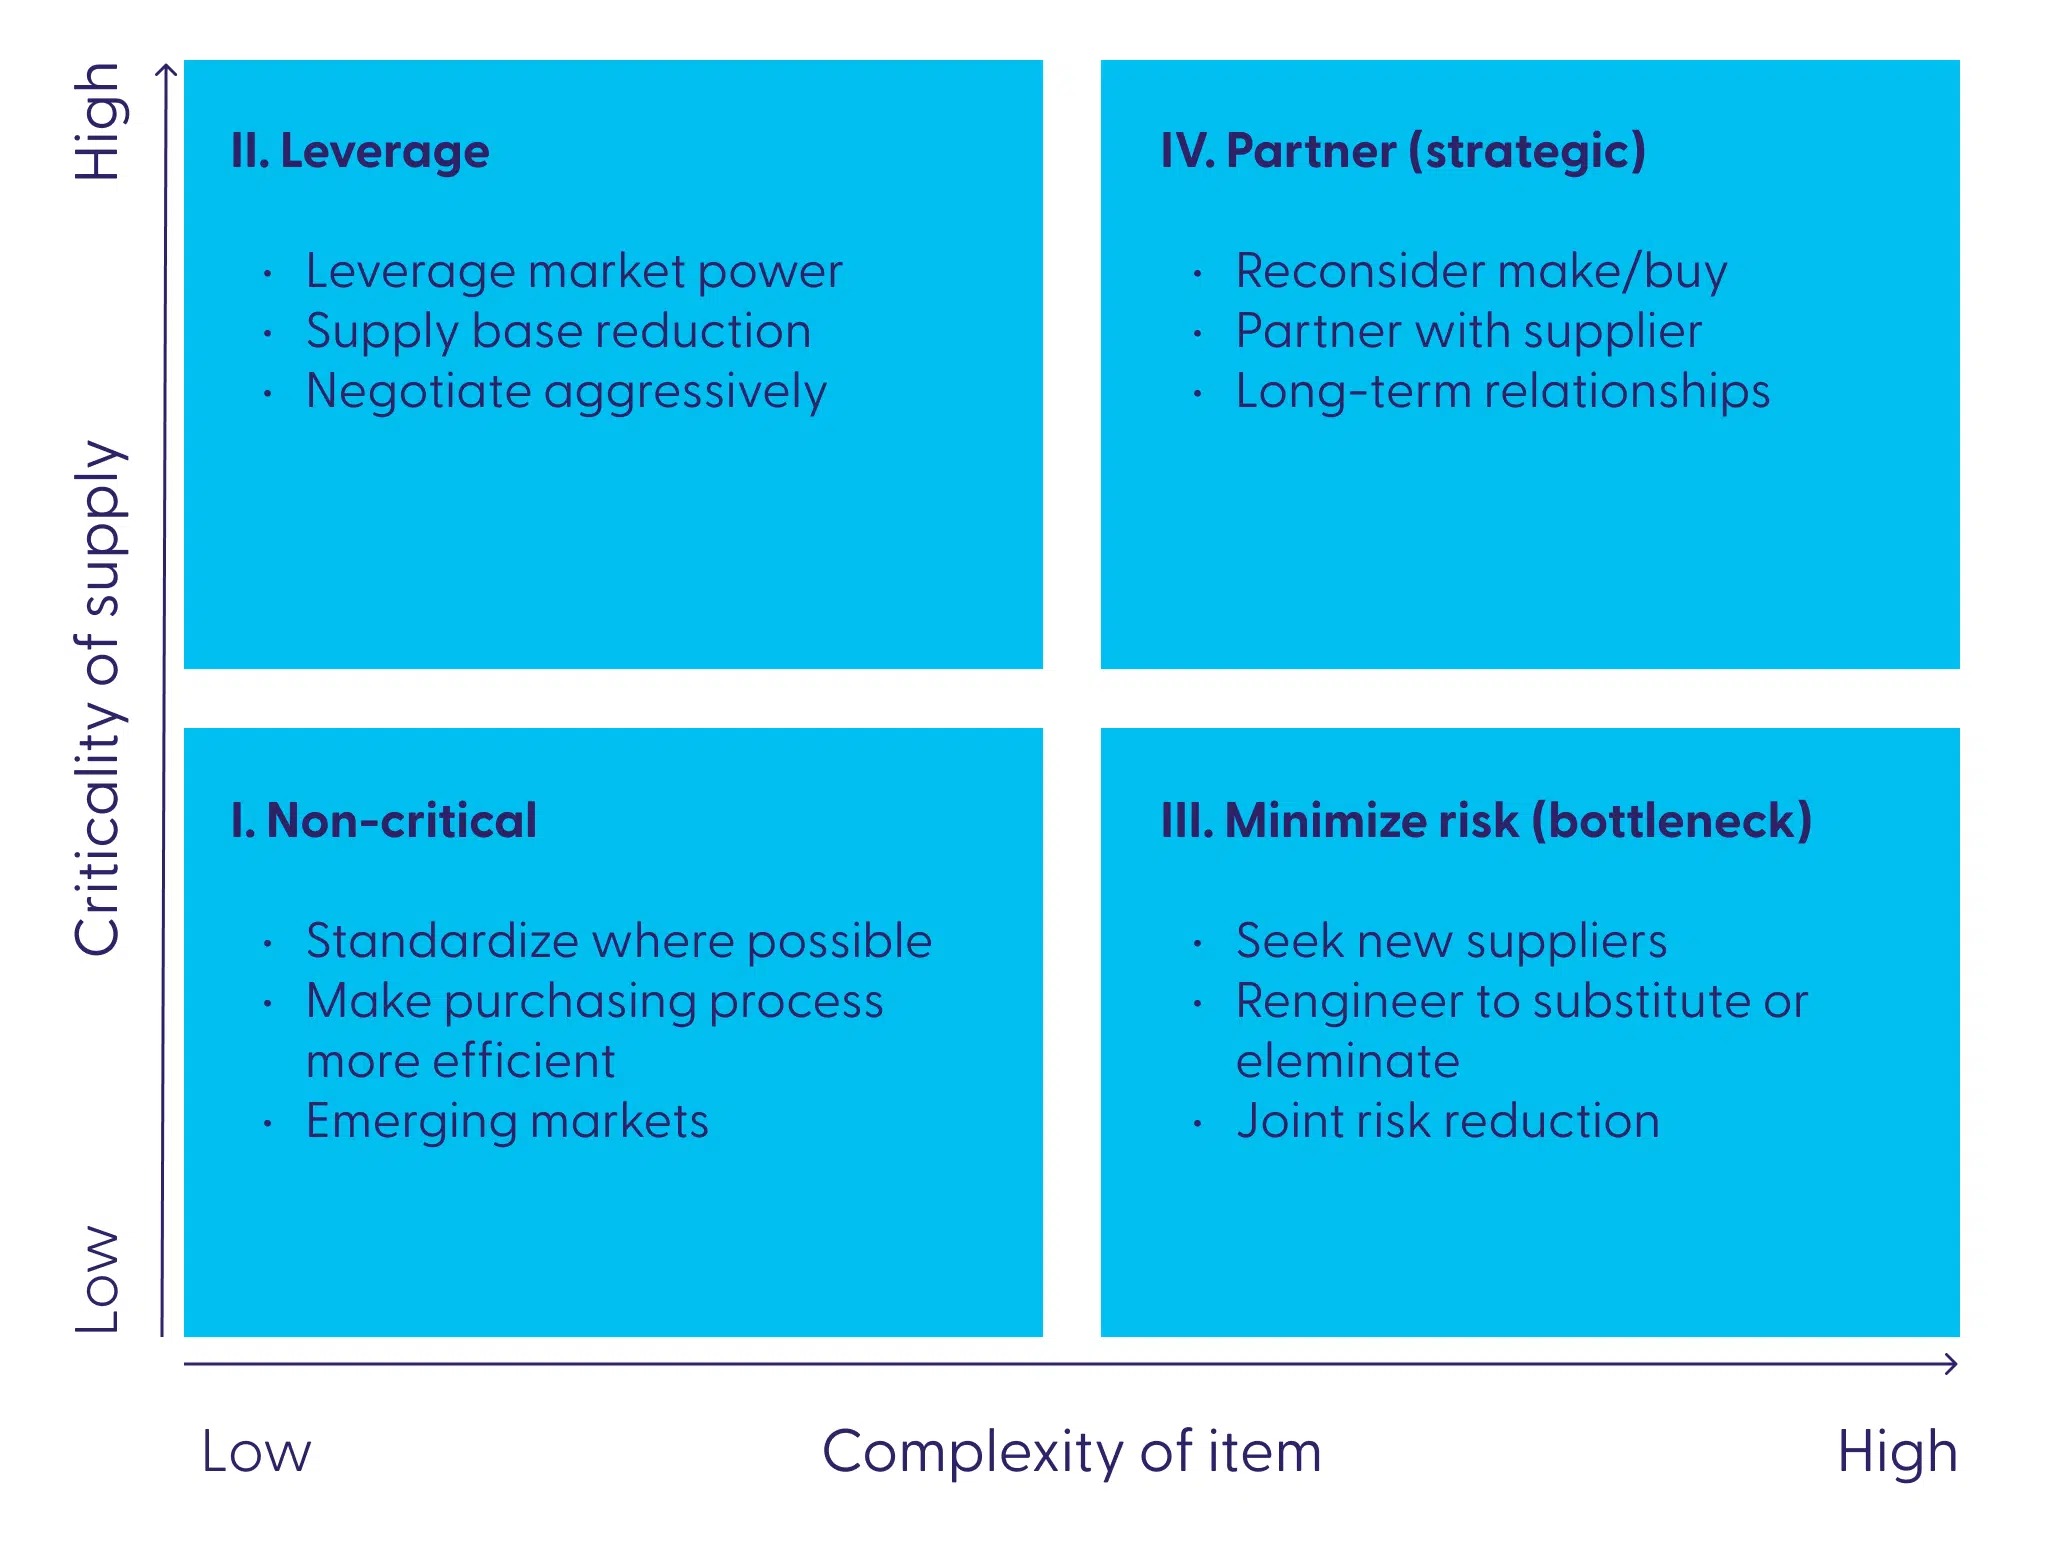 Leverage Items Are Typically Commodities. What Are Some Other Characteristics Of Leverage Items?